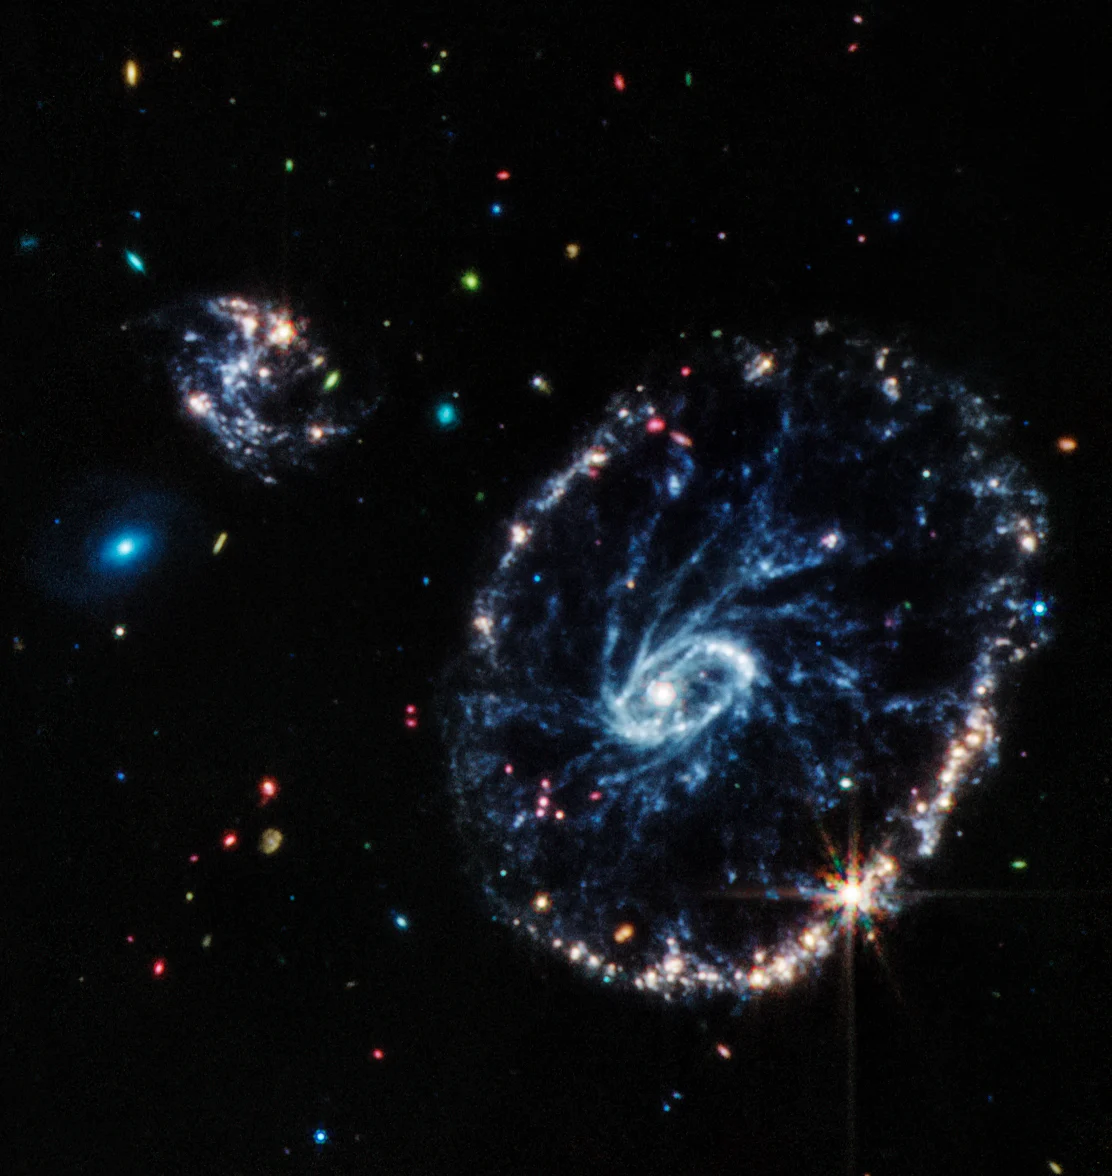 This image from Webb's Mid-Infrared Instrument (MIRI) shows a cluster of galaxies, including a large distorted annular galaxy known as Cartwheel. Located 500 million light-years away in the Sculptor constellation, the Cartwheel Galaxy consists of a bright inner ring and an active outer ring. While this outer ring shows much star formation, the dusty area in between shows many stars and star clusters.